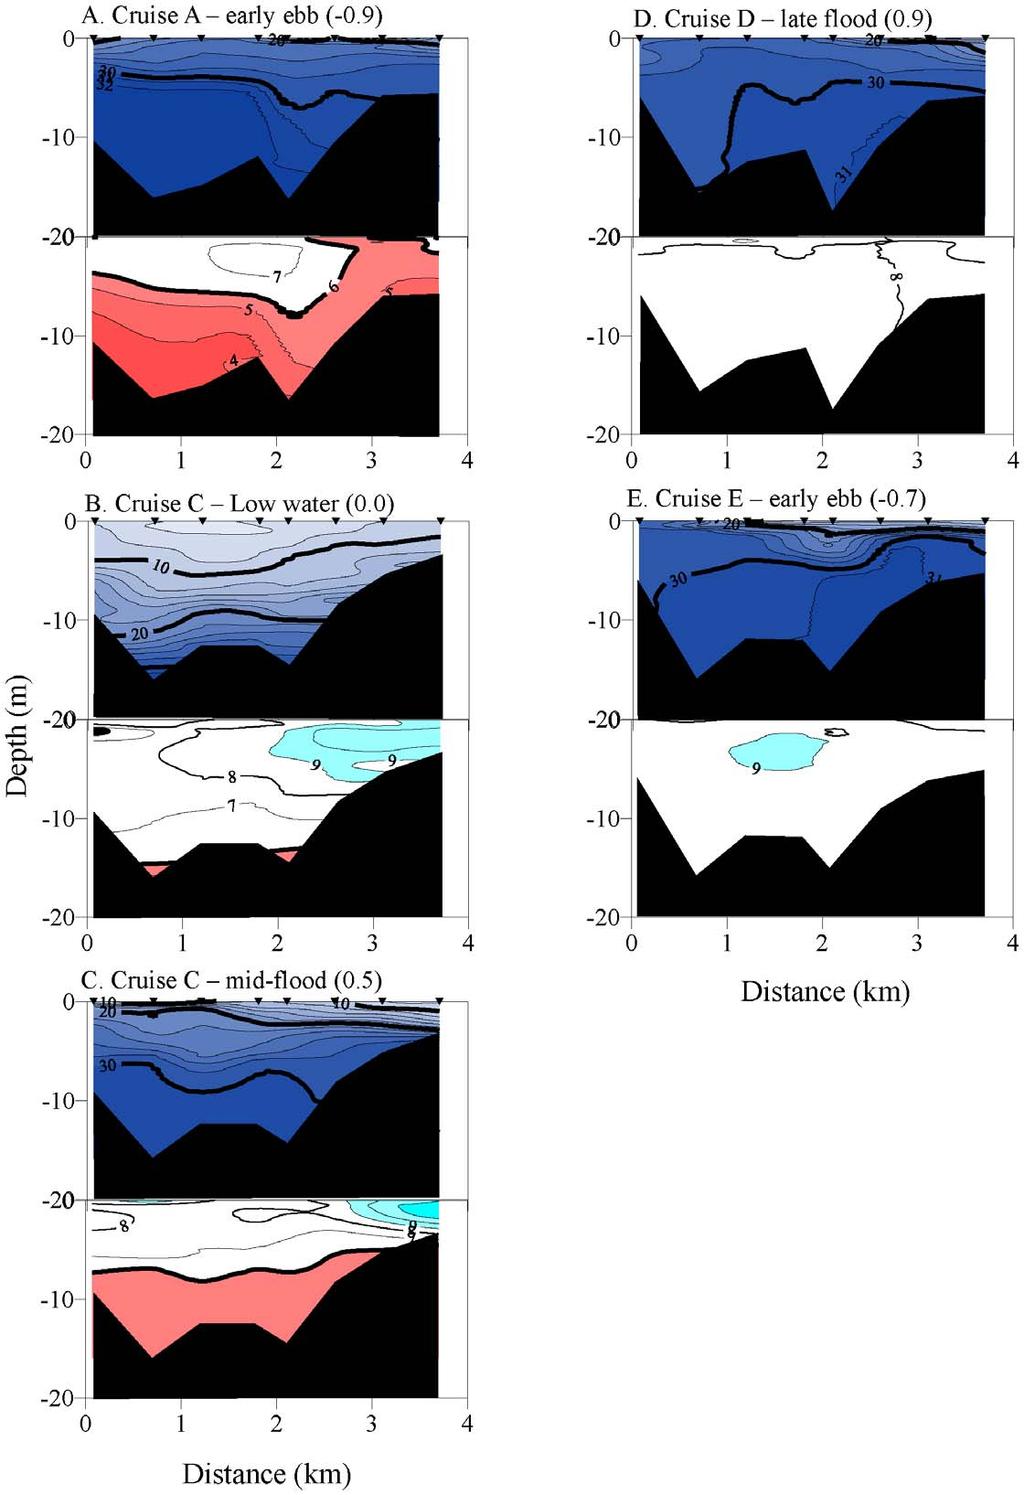 Figure 6. Across-channel transects of vertical water column salinity and dissolved oxygen concentration during Autumn 2006. Salinity, top panels. Oxygen concentration, bottom panels.